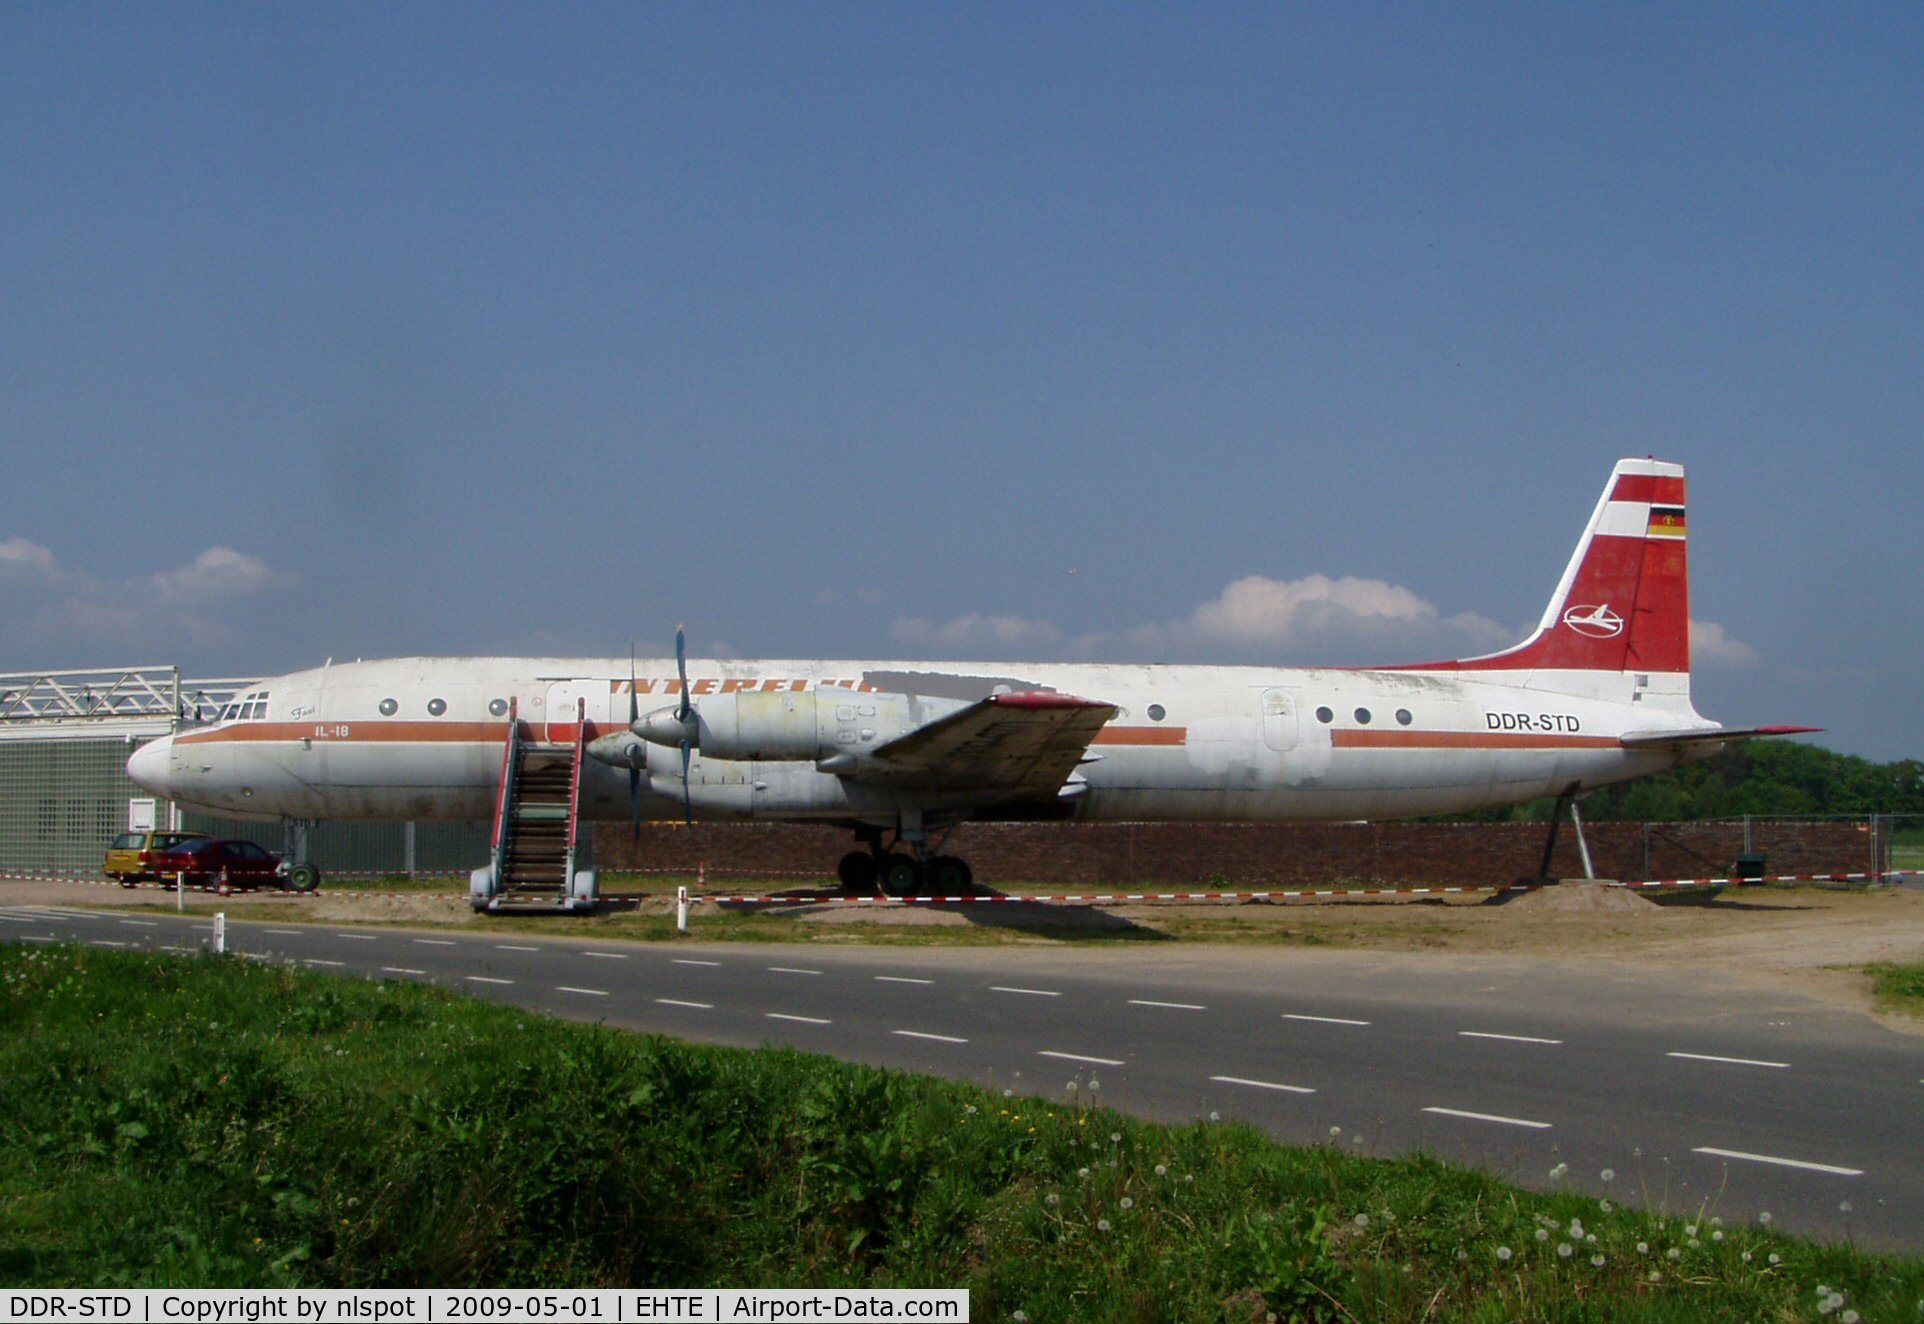 DDR-STD, 1960 Ilyushin Il-18D C/N 180002302, Was a restaurant in Germany, in a few months it's a hotel in the Netherlands.